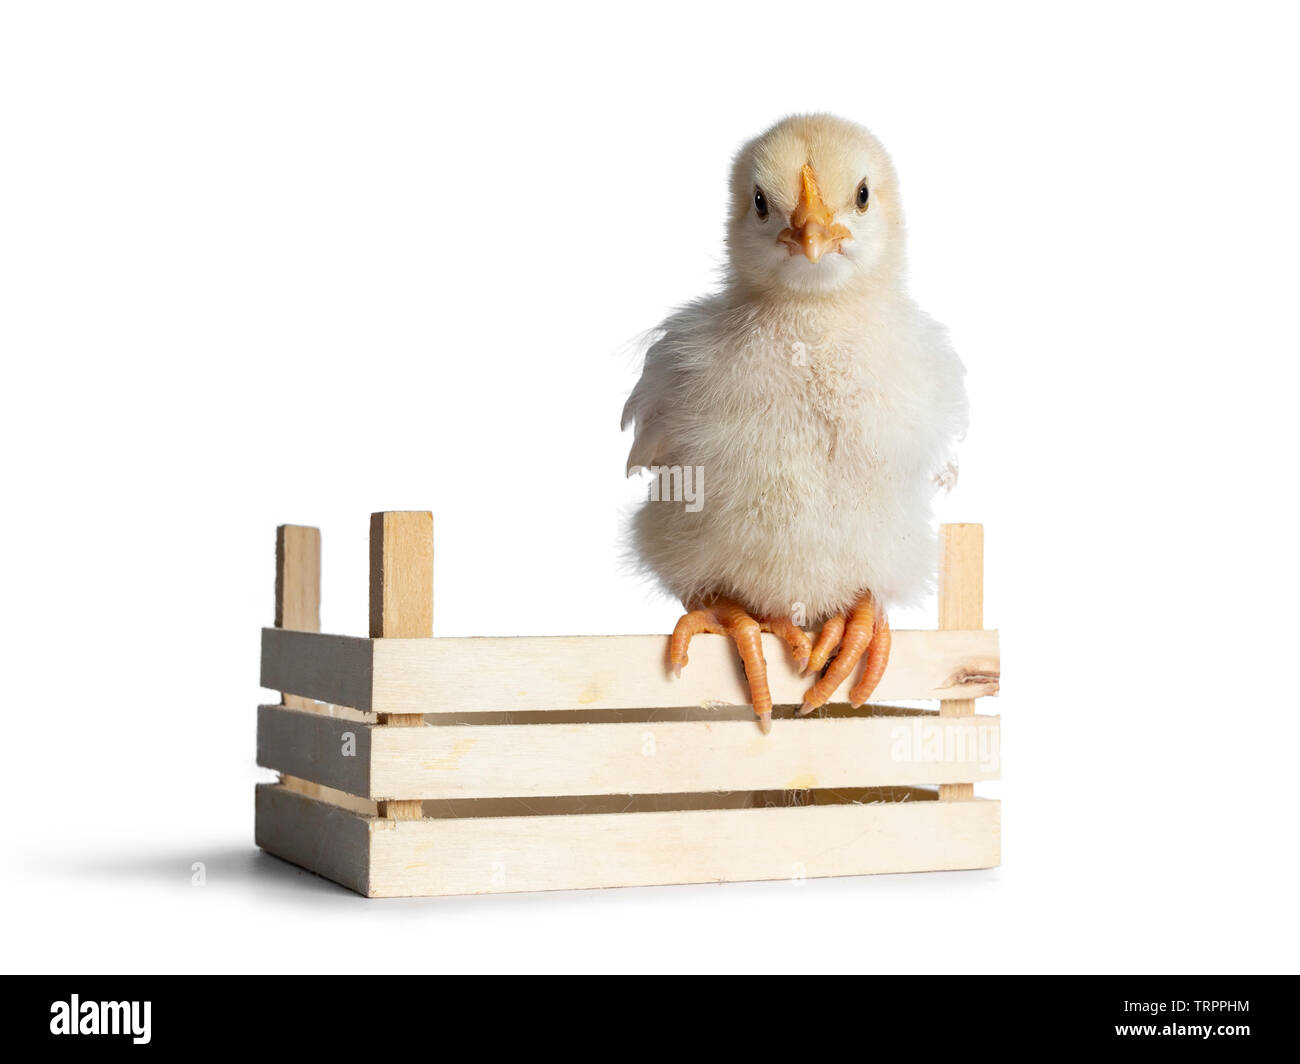 Cute baby chick sitting on edge of little wooden crate, facing front. looking straight agead at lens. isolated on a white backgroud. Stock Photo